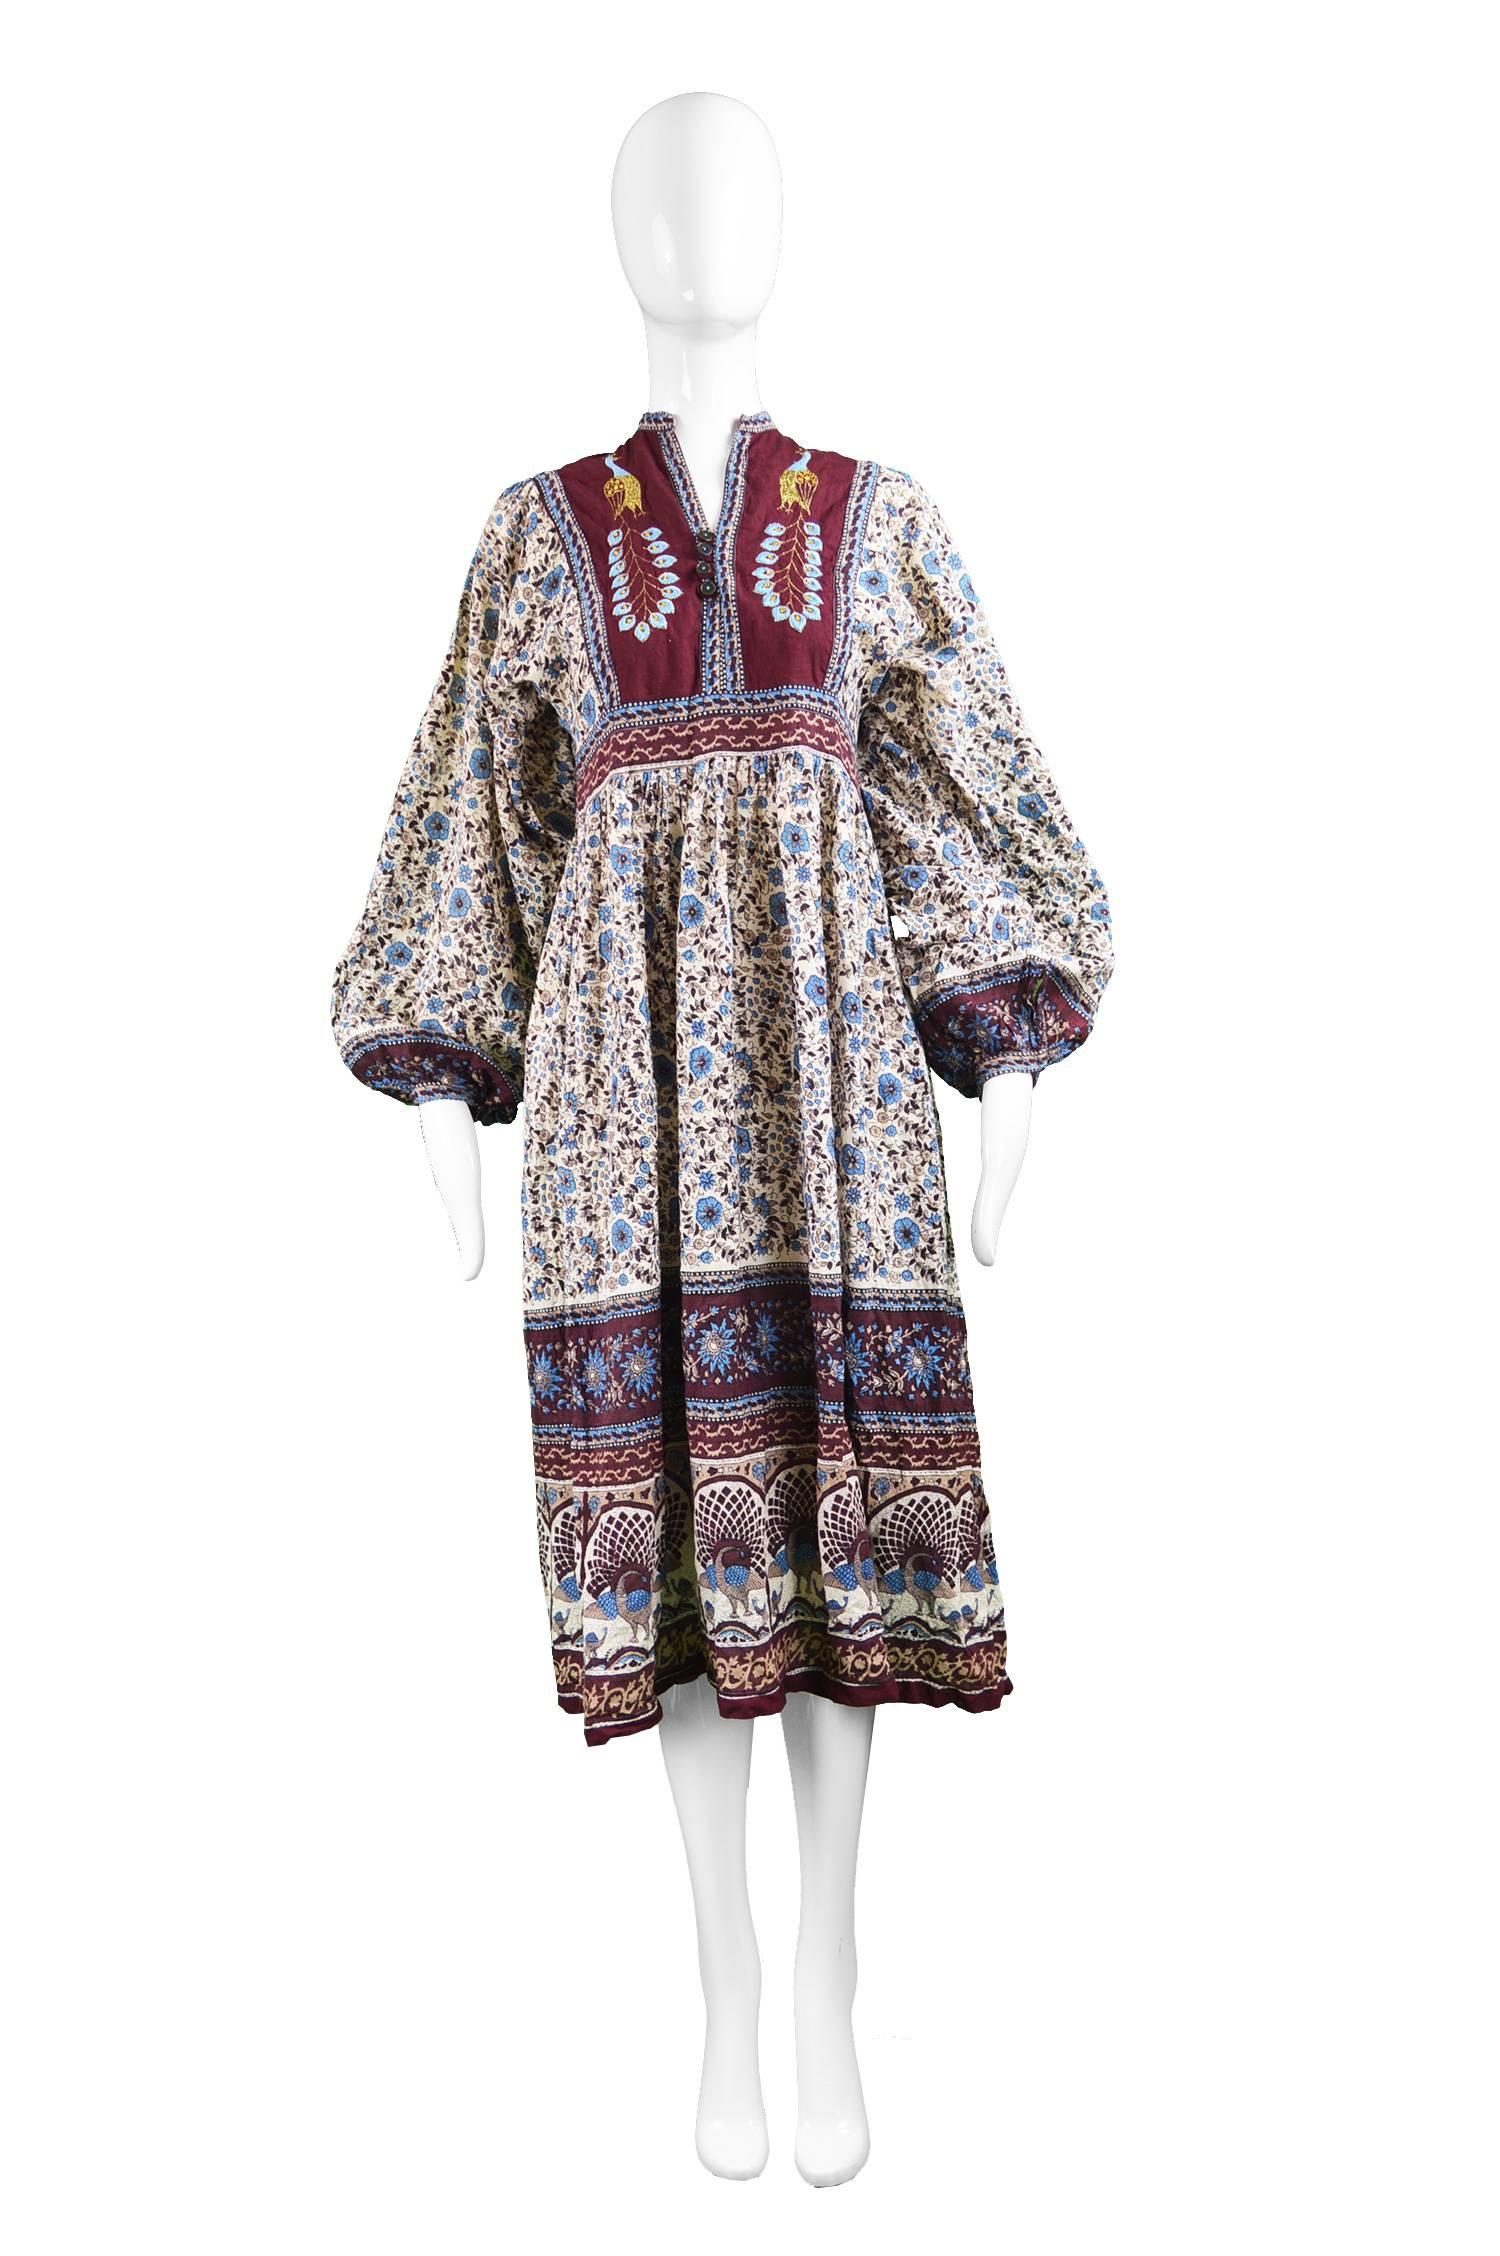 A stunning vintage and highly collectable vintage Indian dress from the 70s in a fine cotton gauze which is so floaty has a just the right amount of sheerness when the sun hits the skirt, giving a diaphanous, flowy quality. The floral block print is